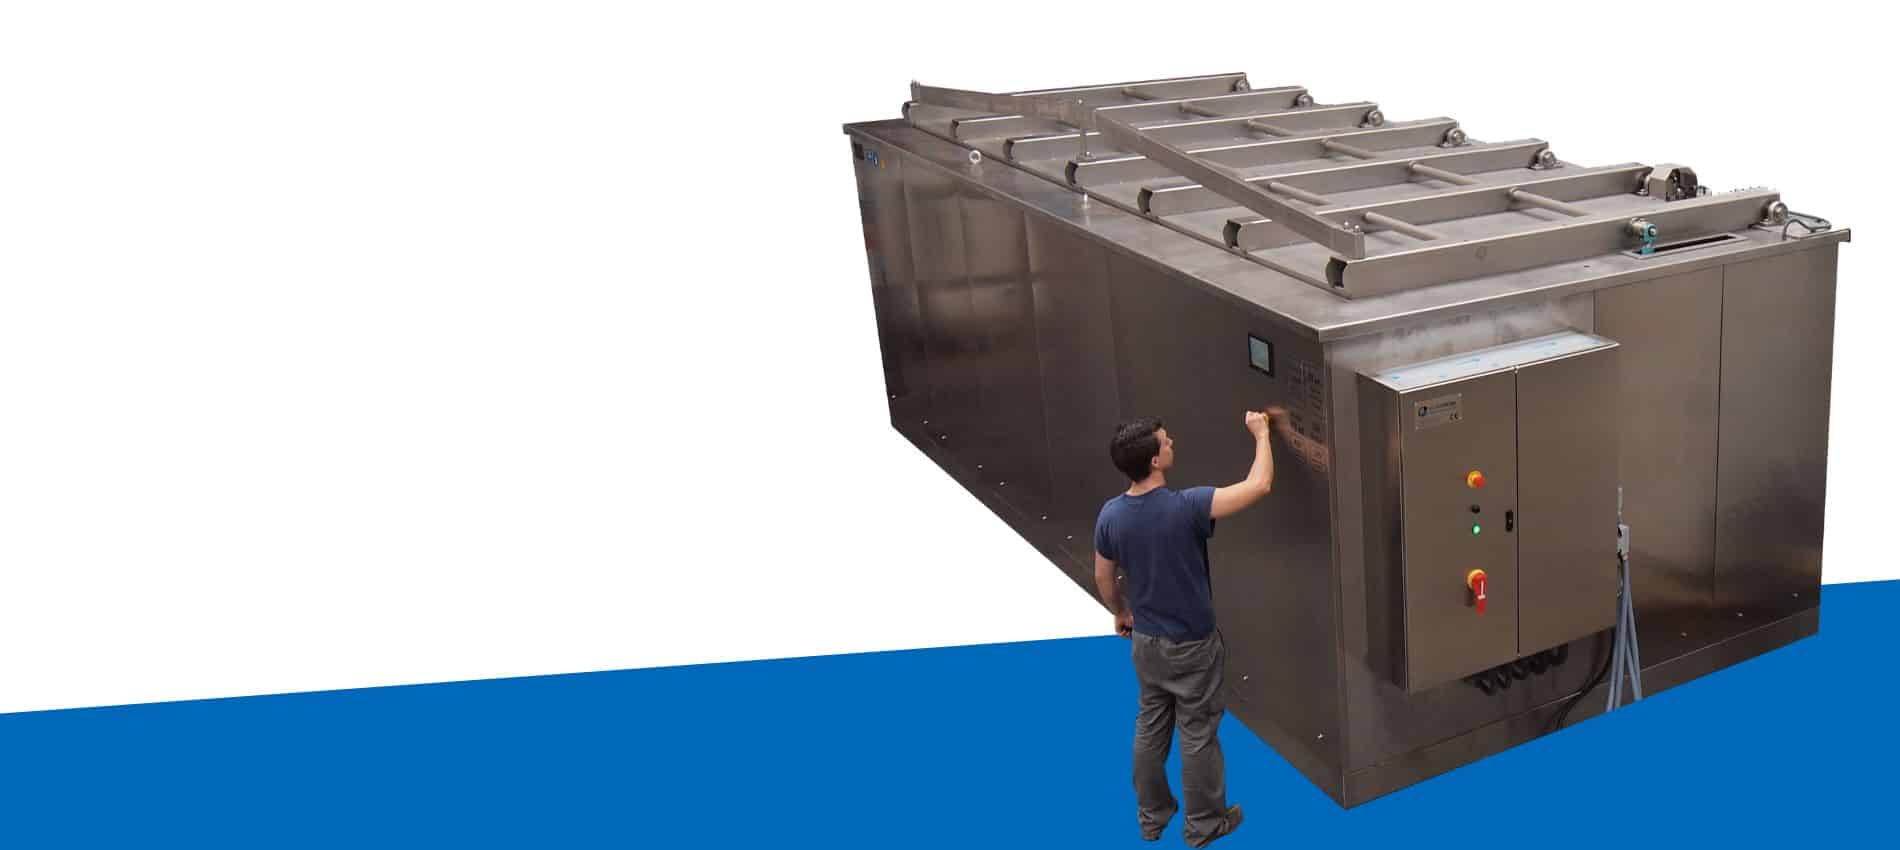 large ultrasonic cleaning tanks